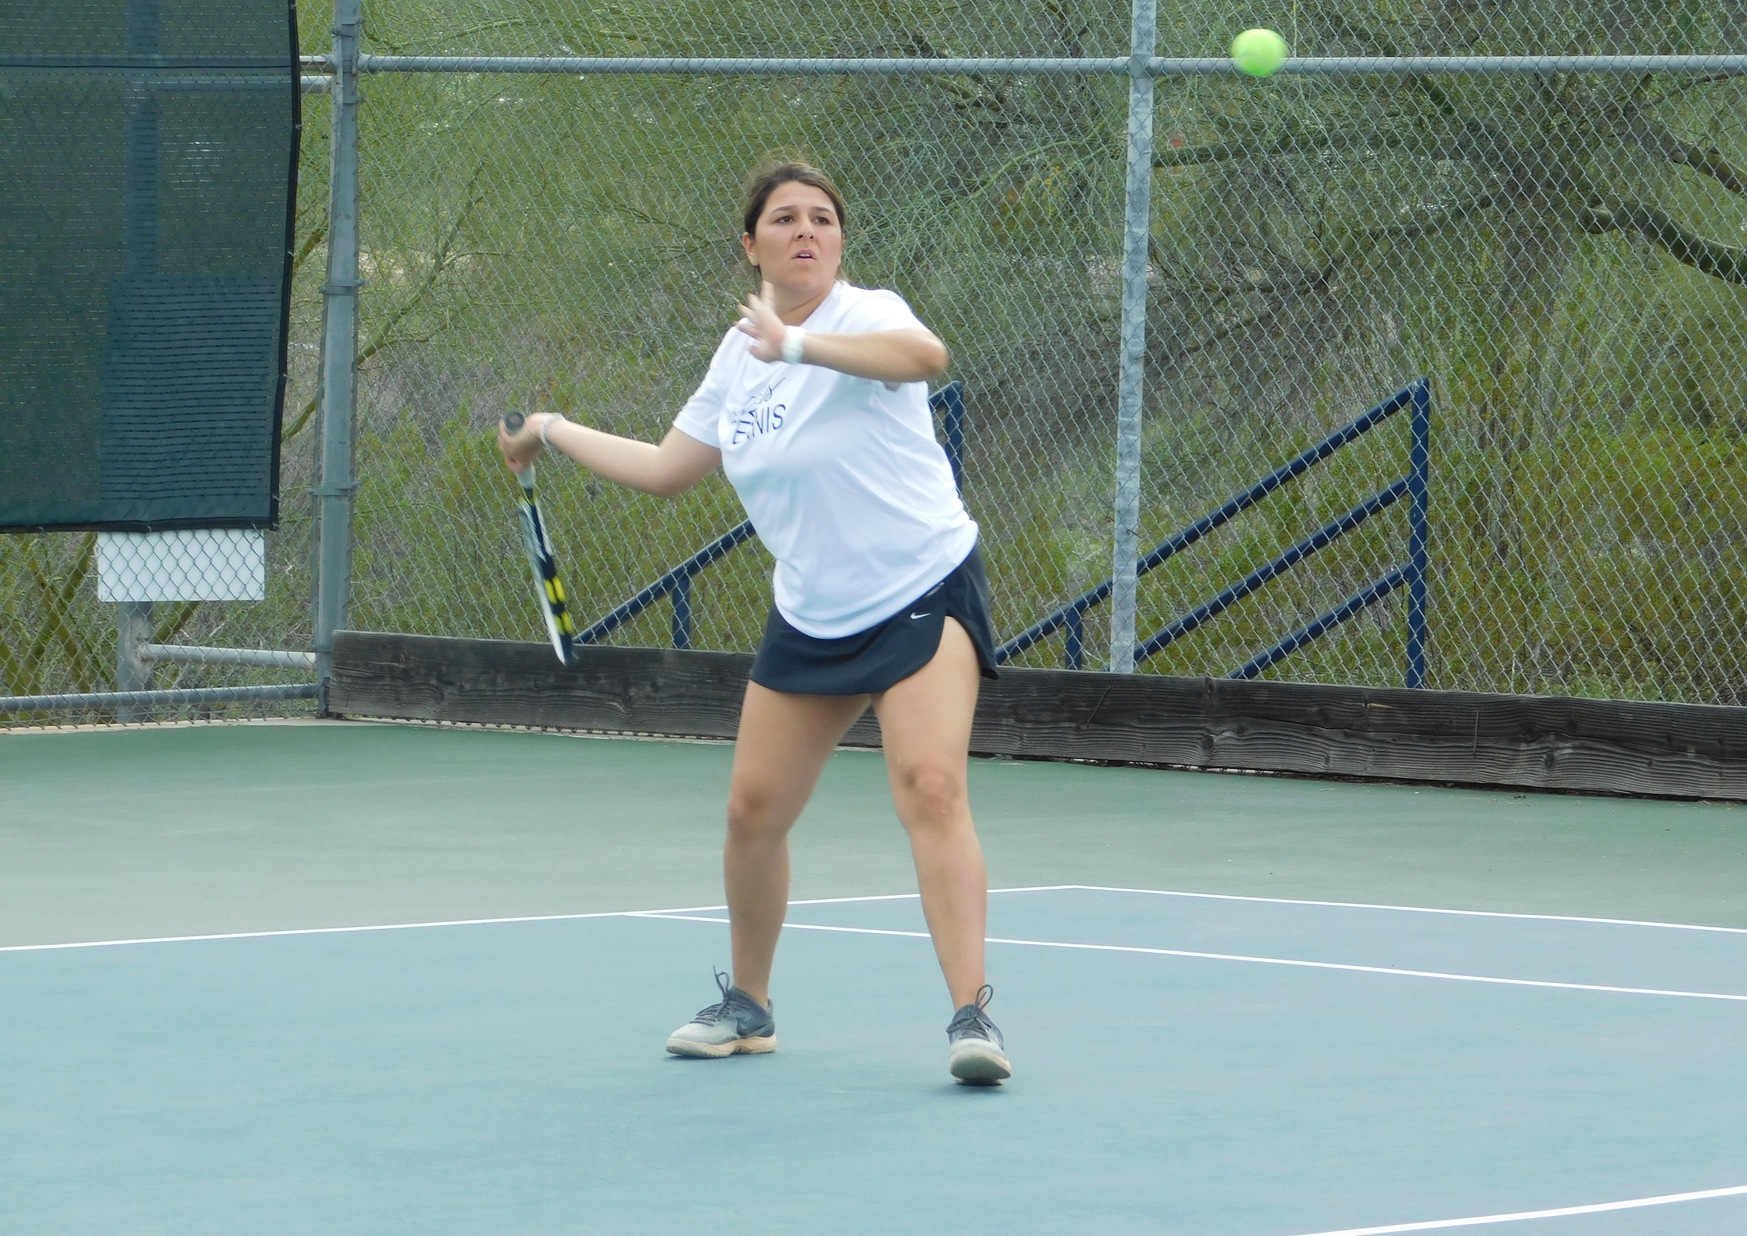 Freshman Valeria Miranda (Sunnyside HS) earned wins in singles and doubles competition on the day as the Aztecs women's tennis team downed Glendale Community College 7-2. The Aztecs improved to 4-3 on the season. Photo by Raymond Suarez